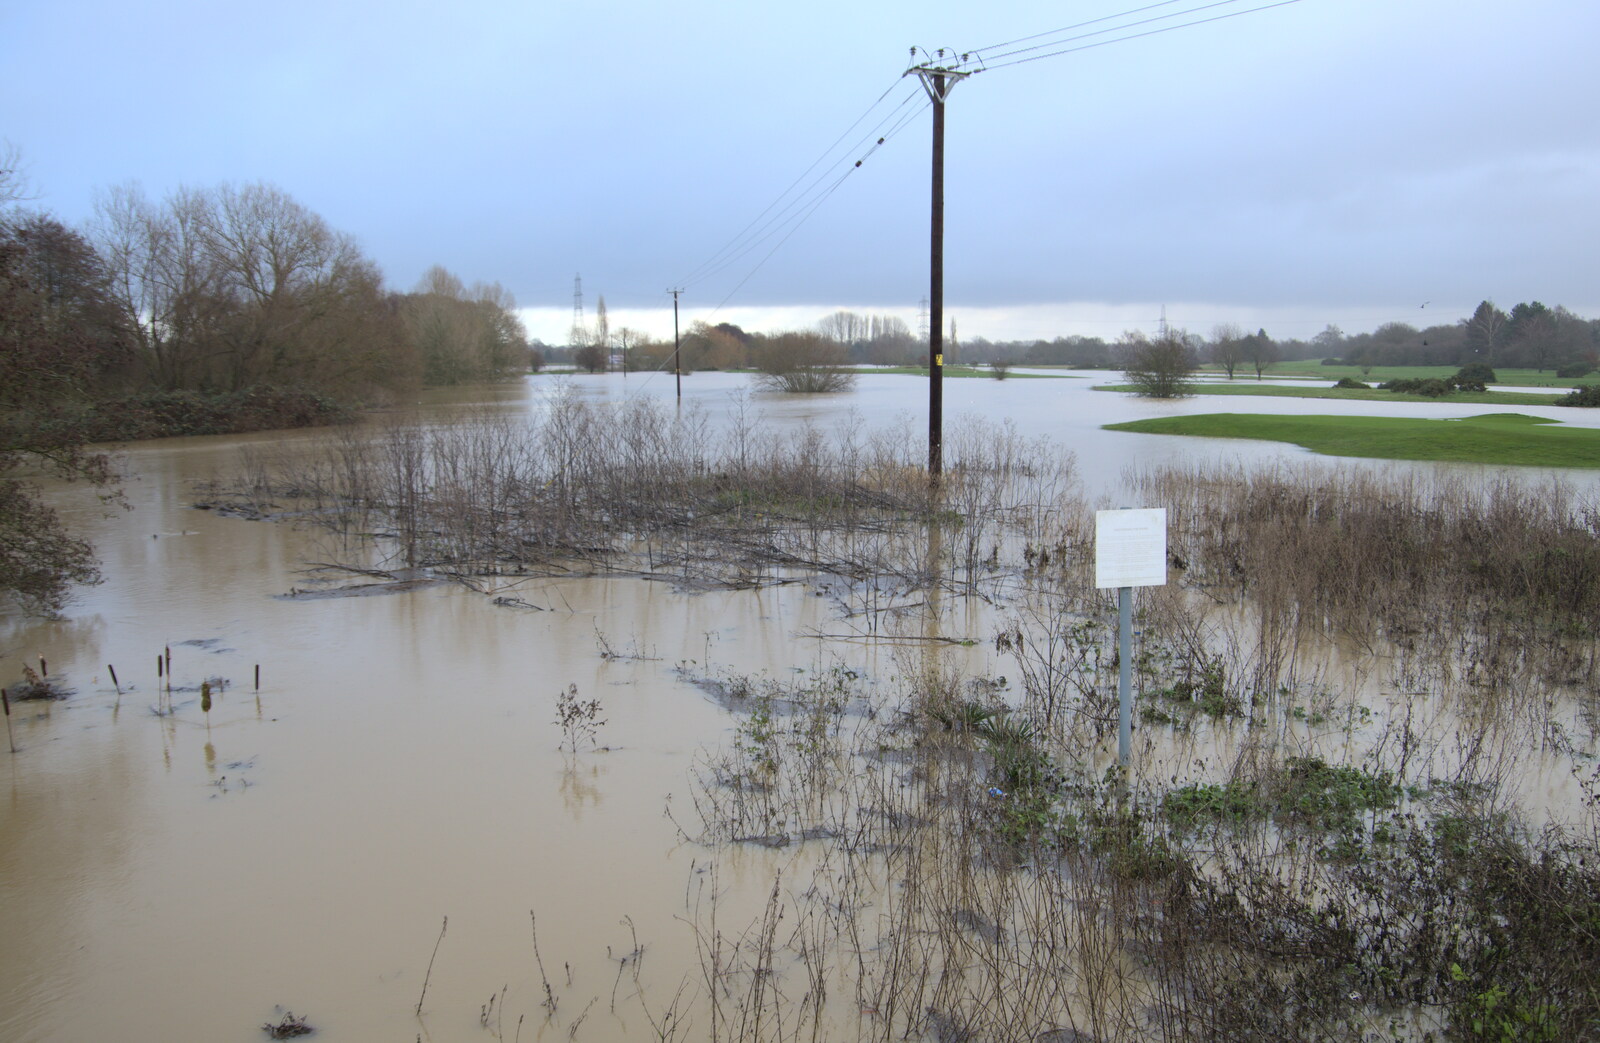 Another view of the submerged golf course from The Christmas Eve Floods, Diss, Norfolk - 24th December 2020